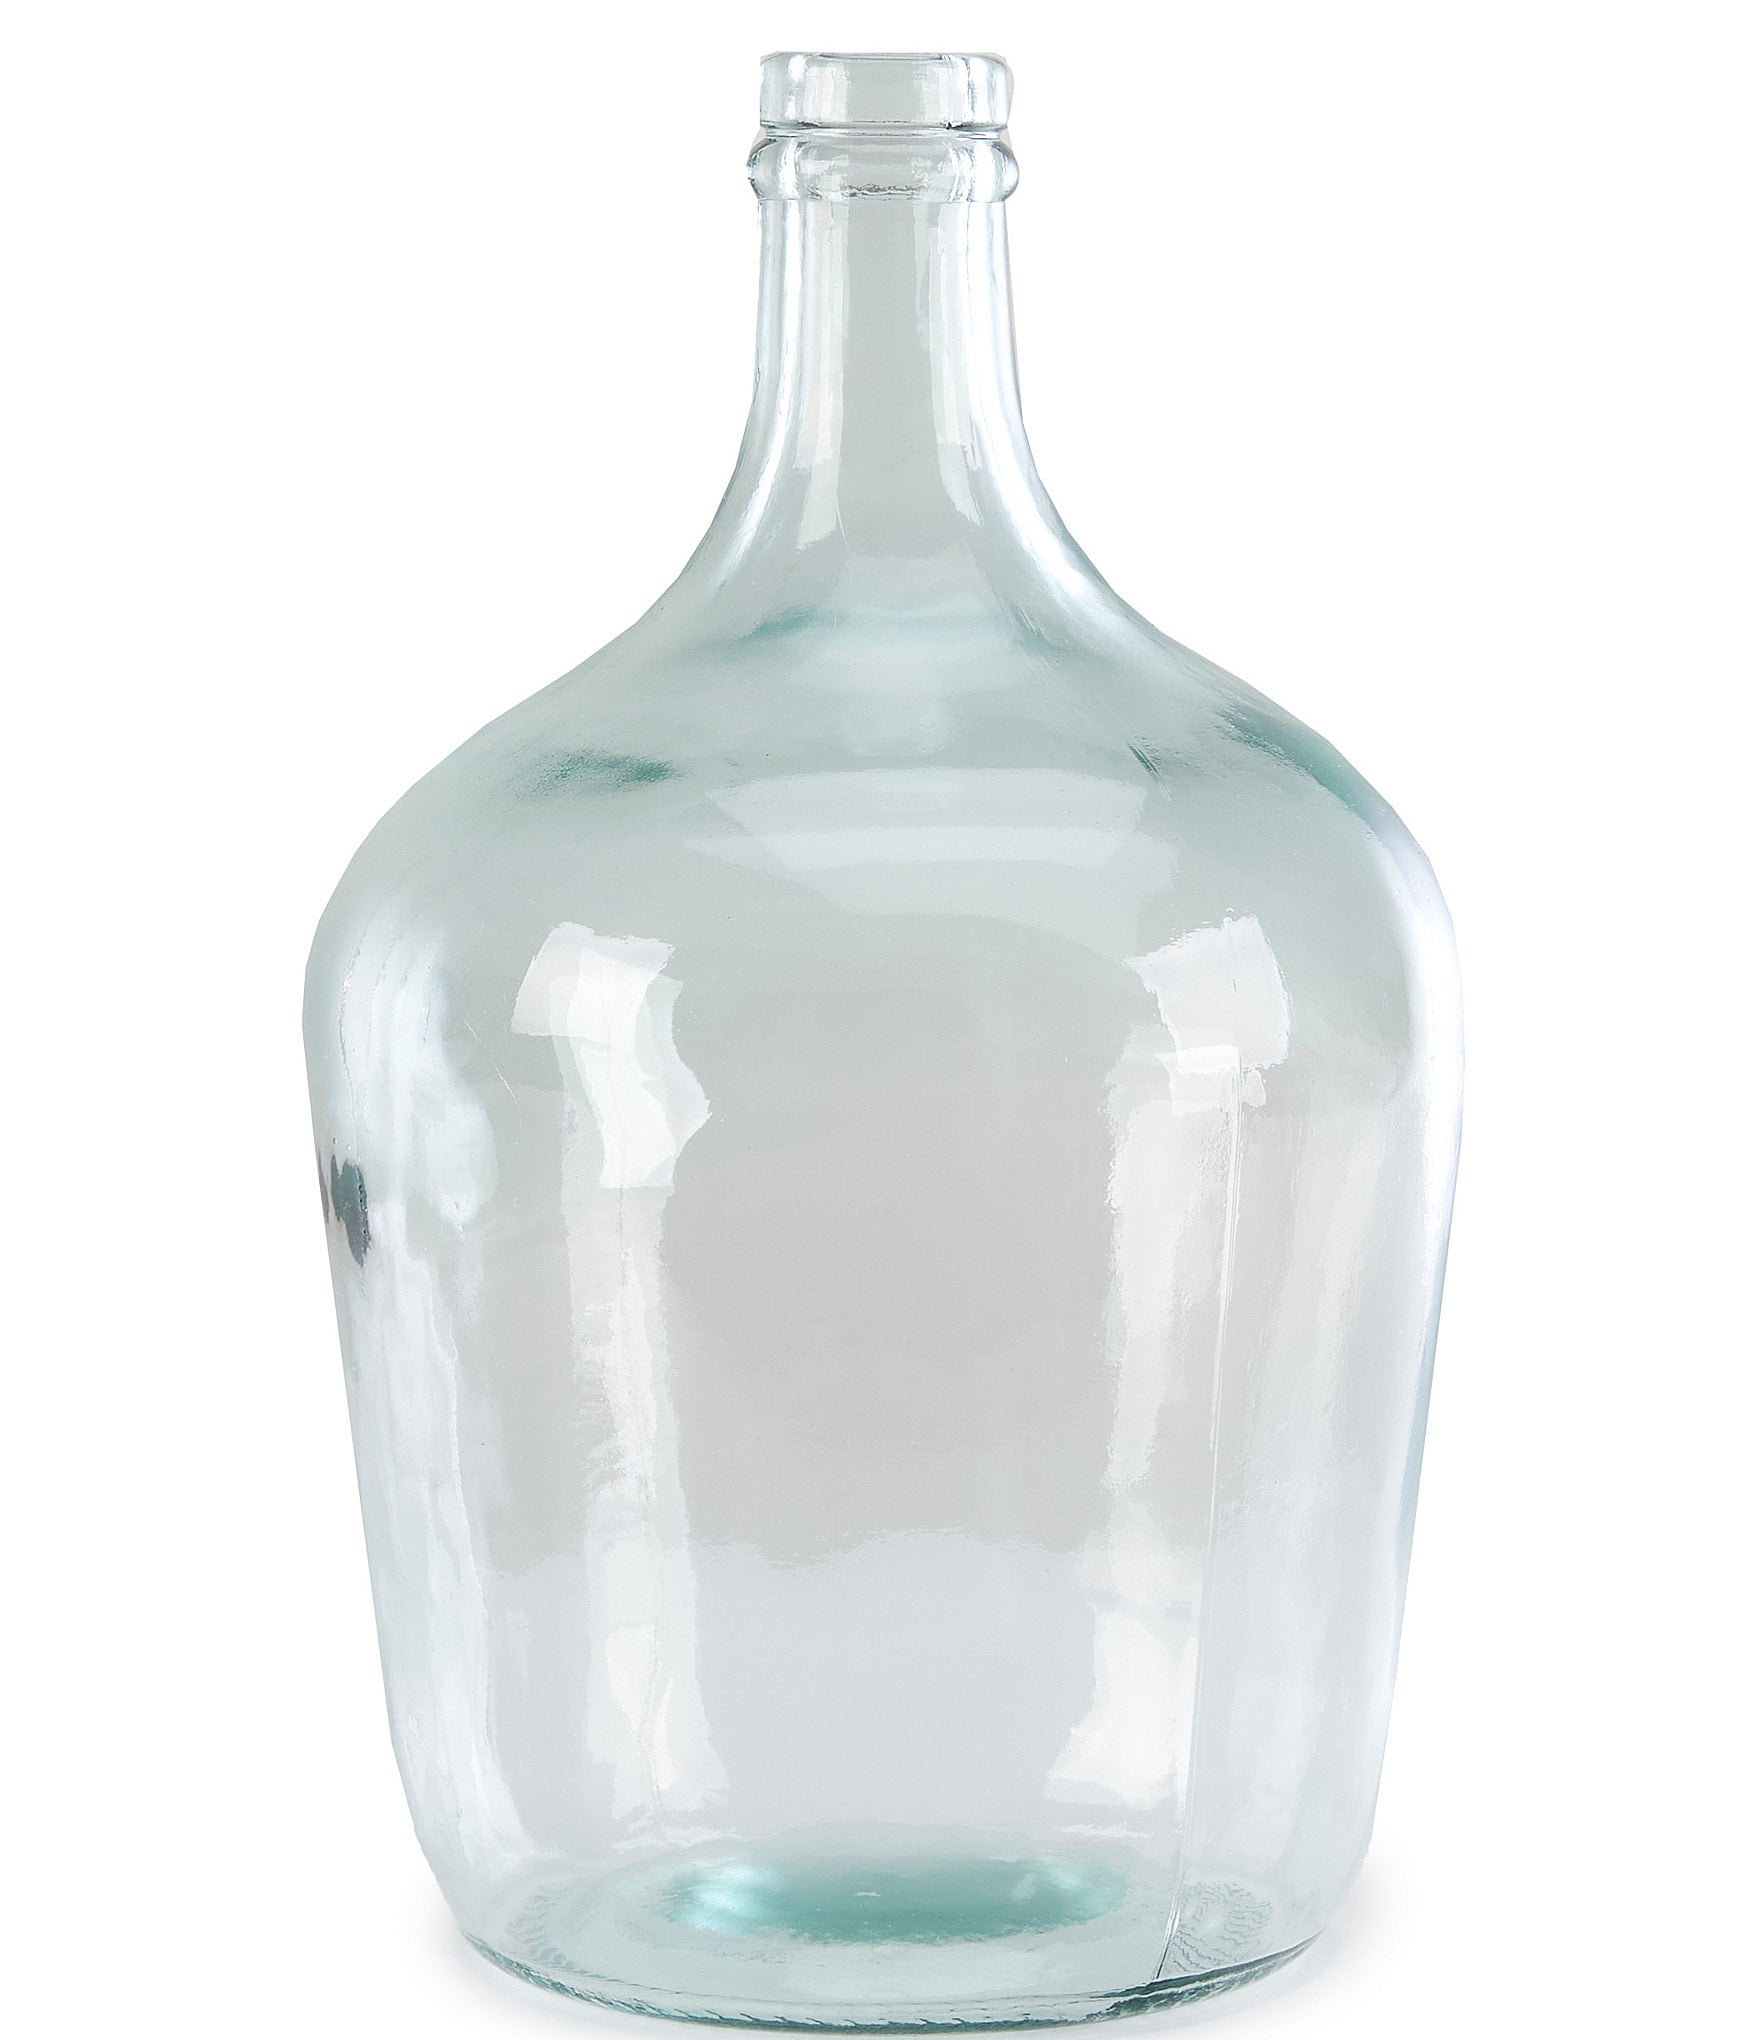 https://dimg.dillards.com/is/image/DillardsZoom/zoom/southern-living-simplicity-collection-recycled-glass-demijohn-vase/00000000_zi_6bef8dd1-6433-4728-ad0e-0bae726a3259.jpg